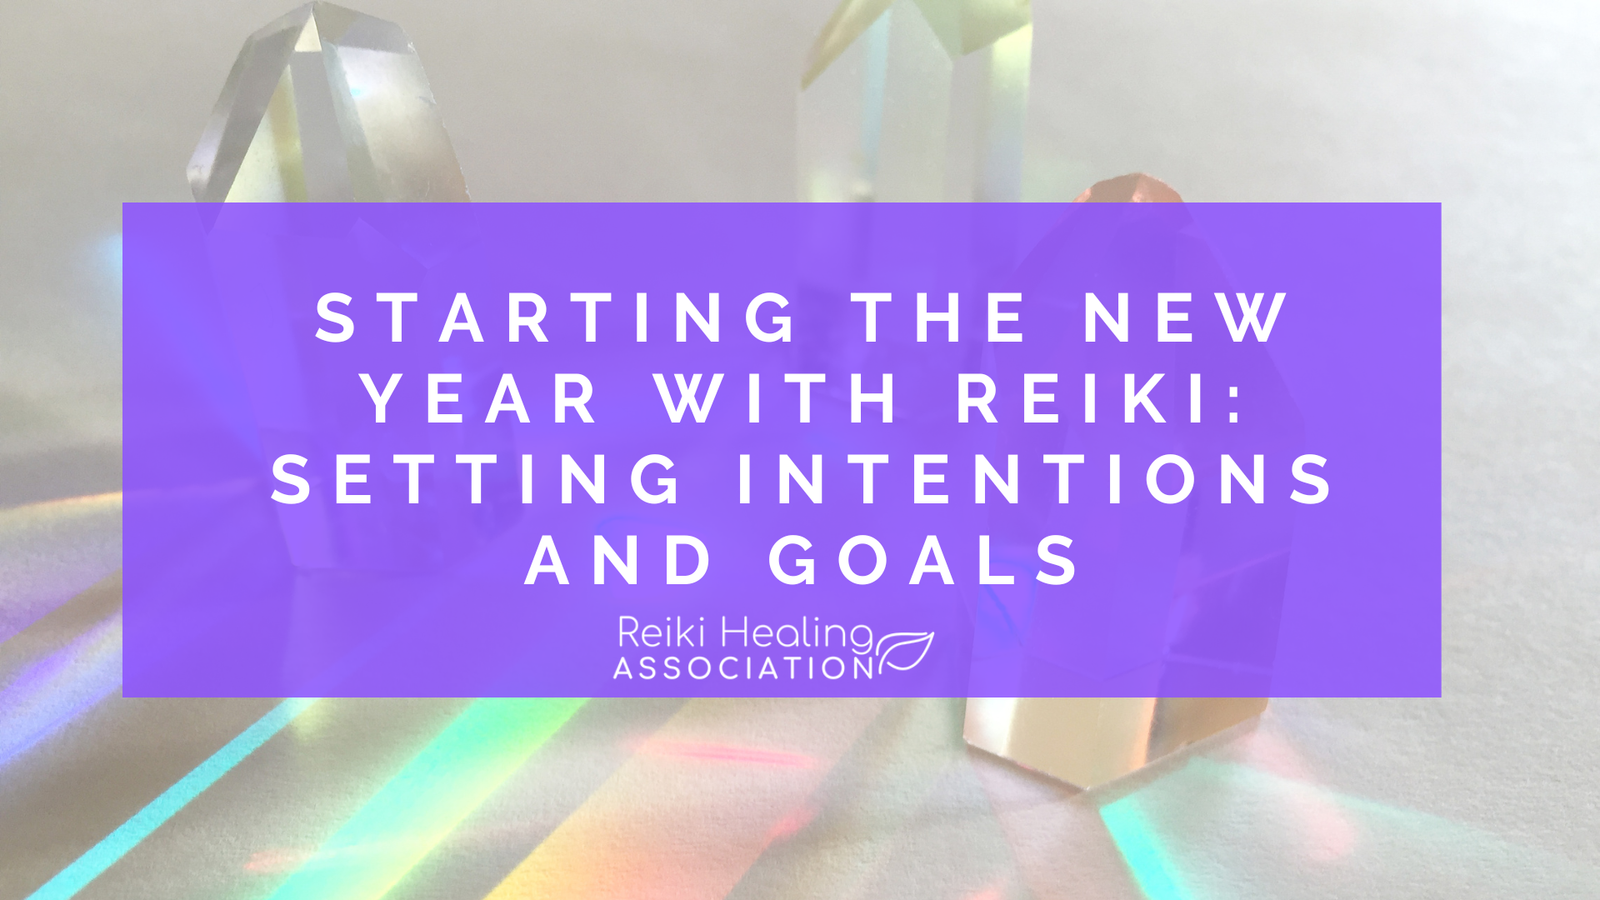 Starting the New Year with Reiki: Setting Intentions and Goals